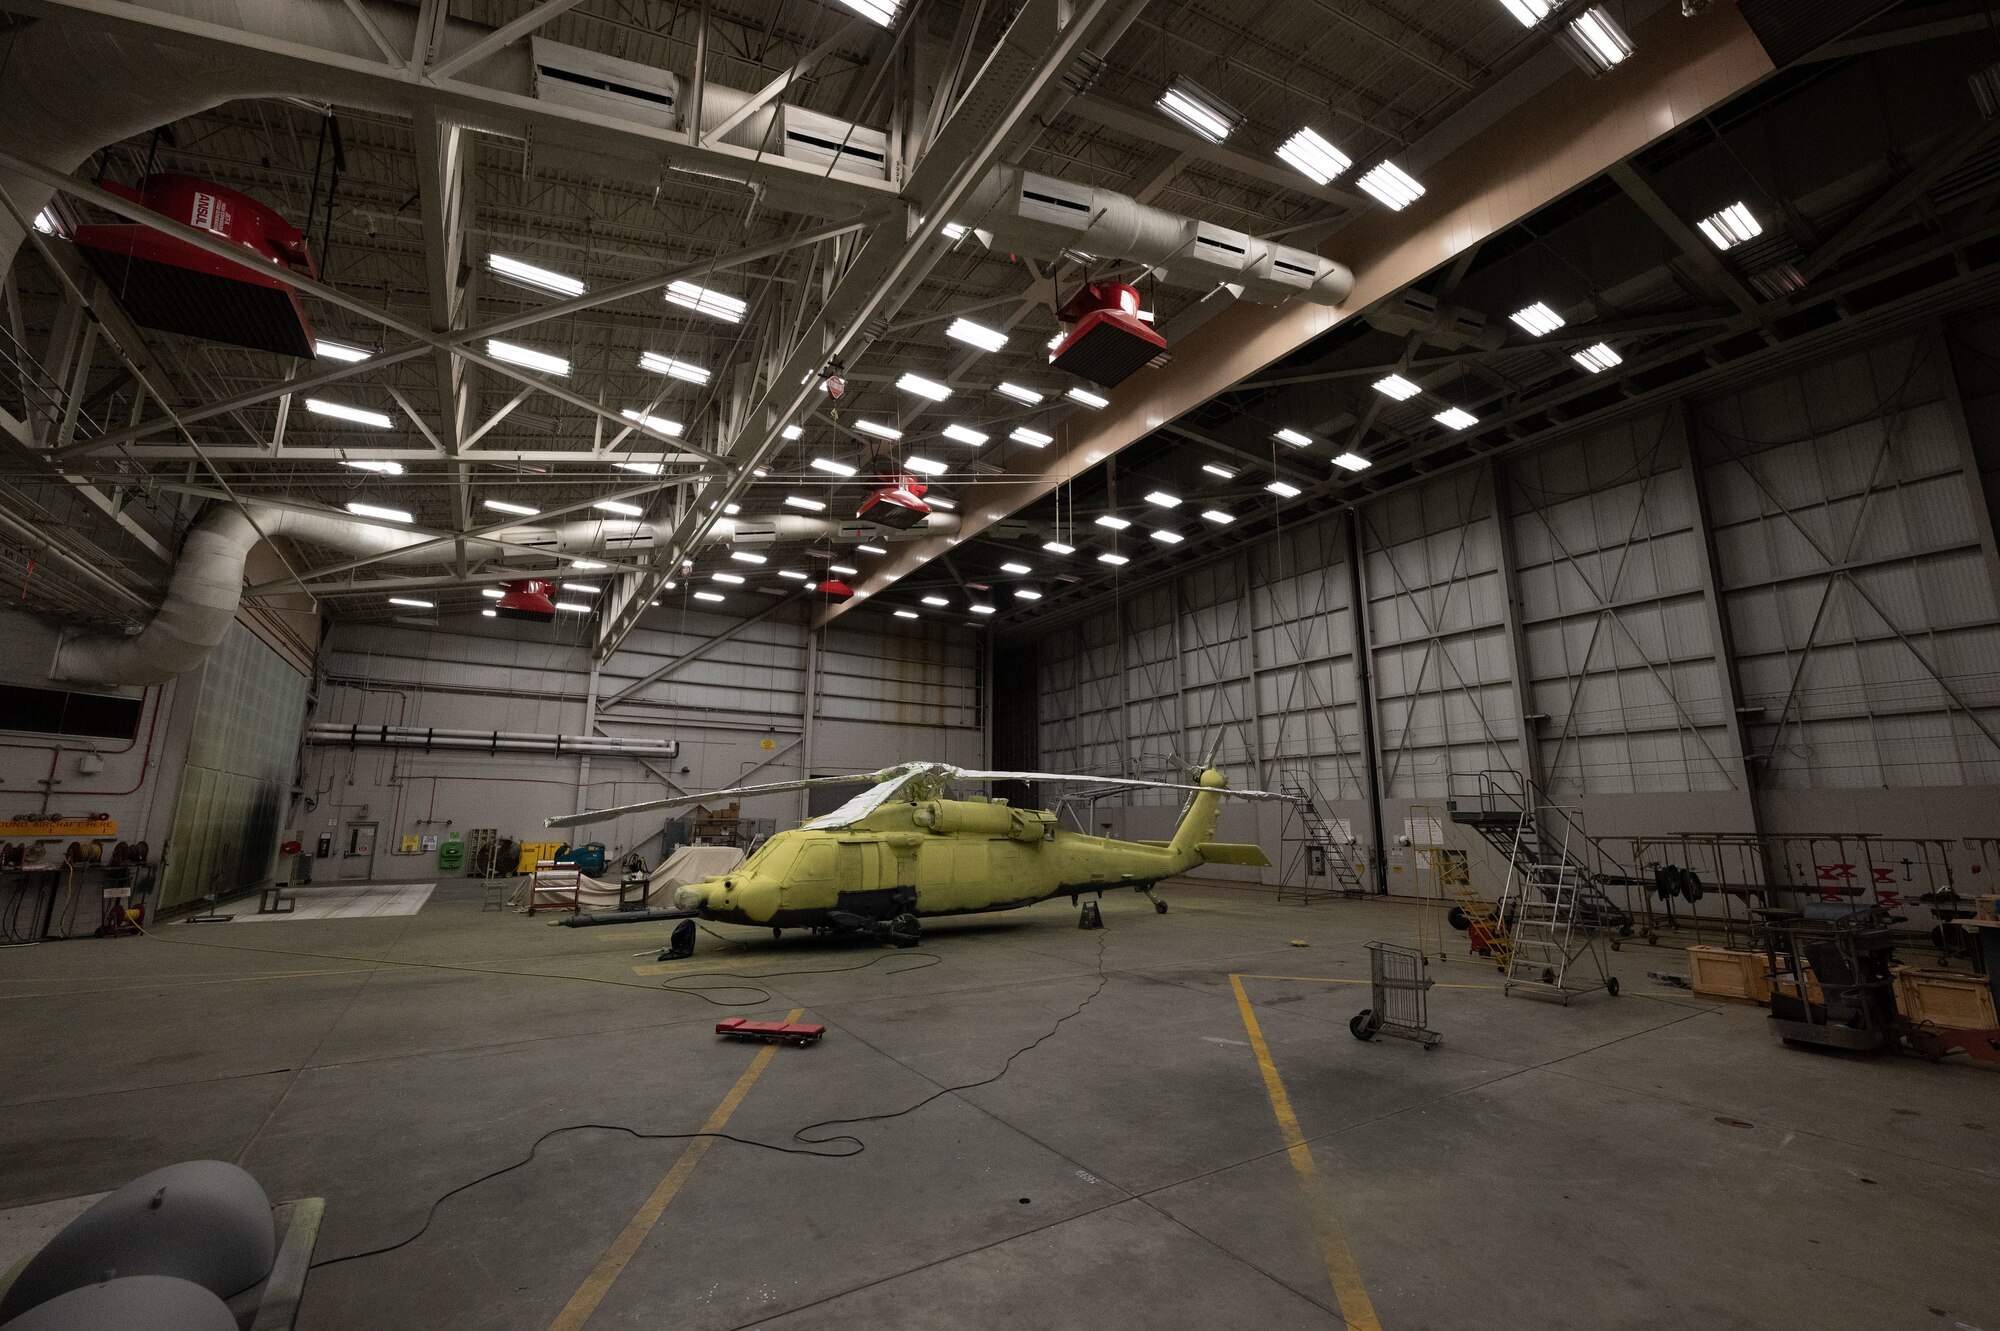 An MH-60G Pave Hawk Helicopter waits to be primed and painted in the 1st Special Operations Maintenance Squadron corrosion control shop at Hurlburt Field, Florida, Feb. 16, 2022.